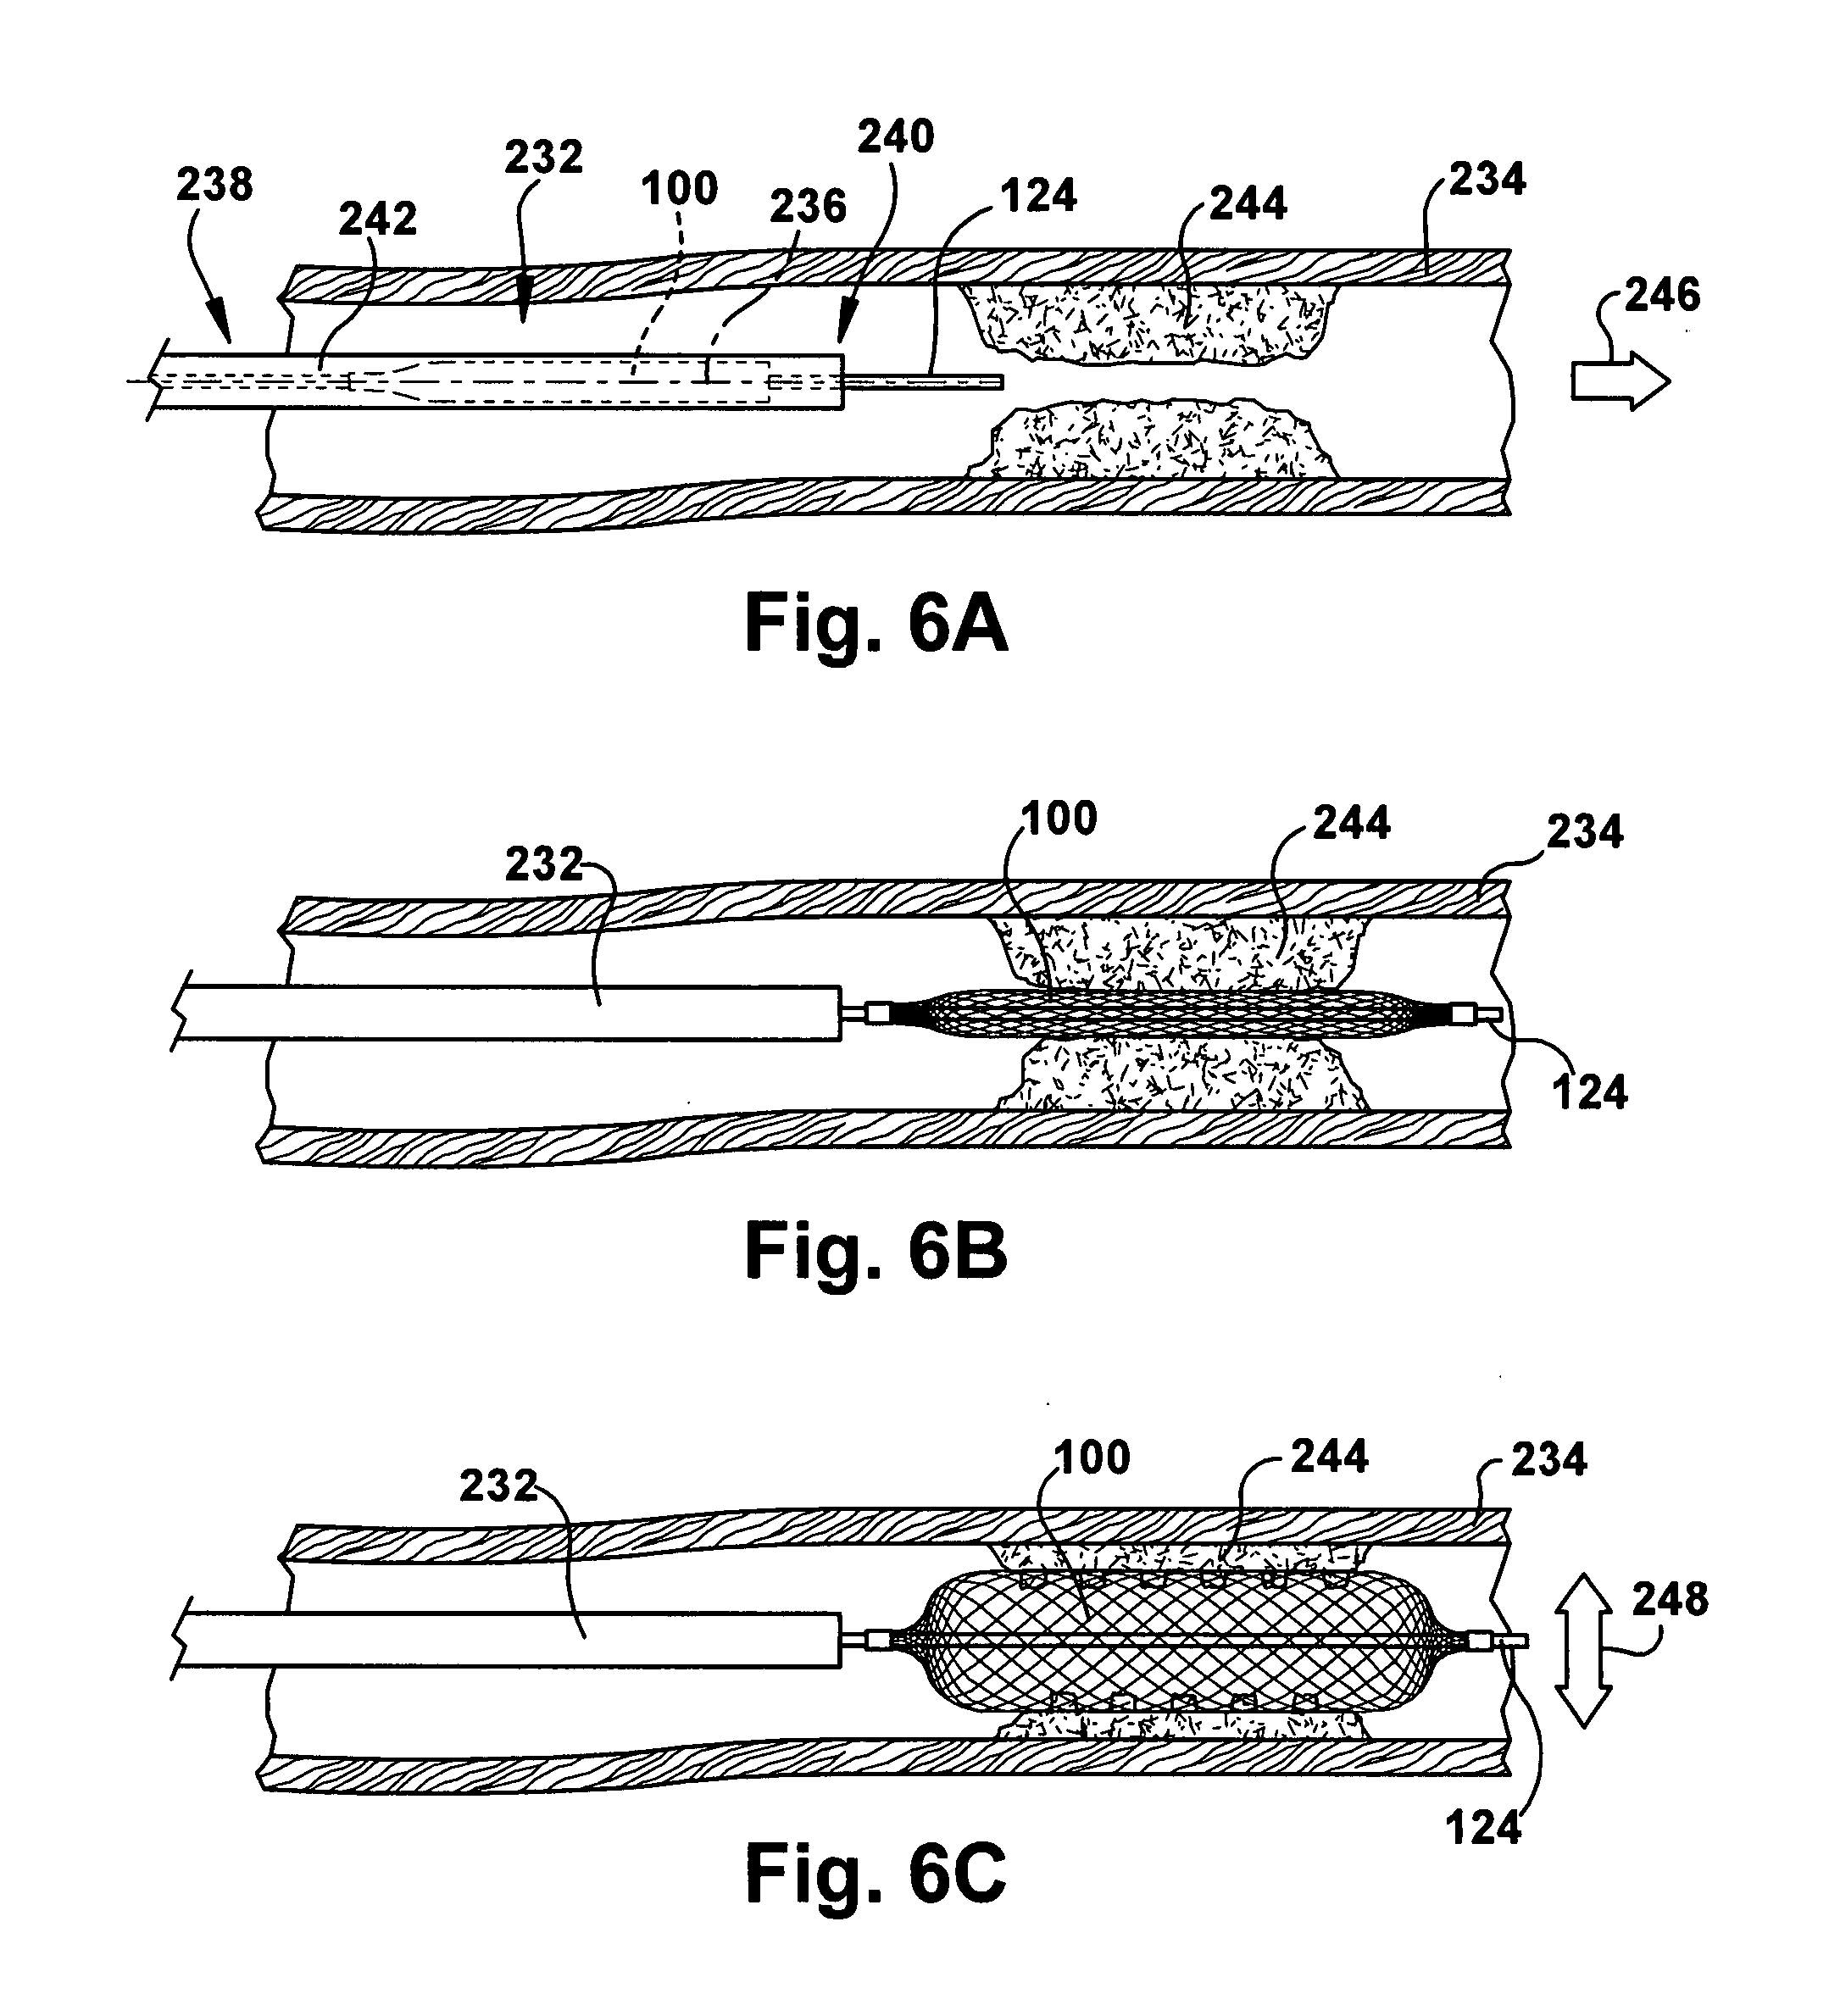 Method and apparatus for increasing blood flow through an obstructed blood vessel